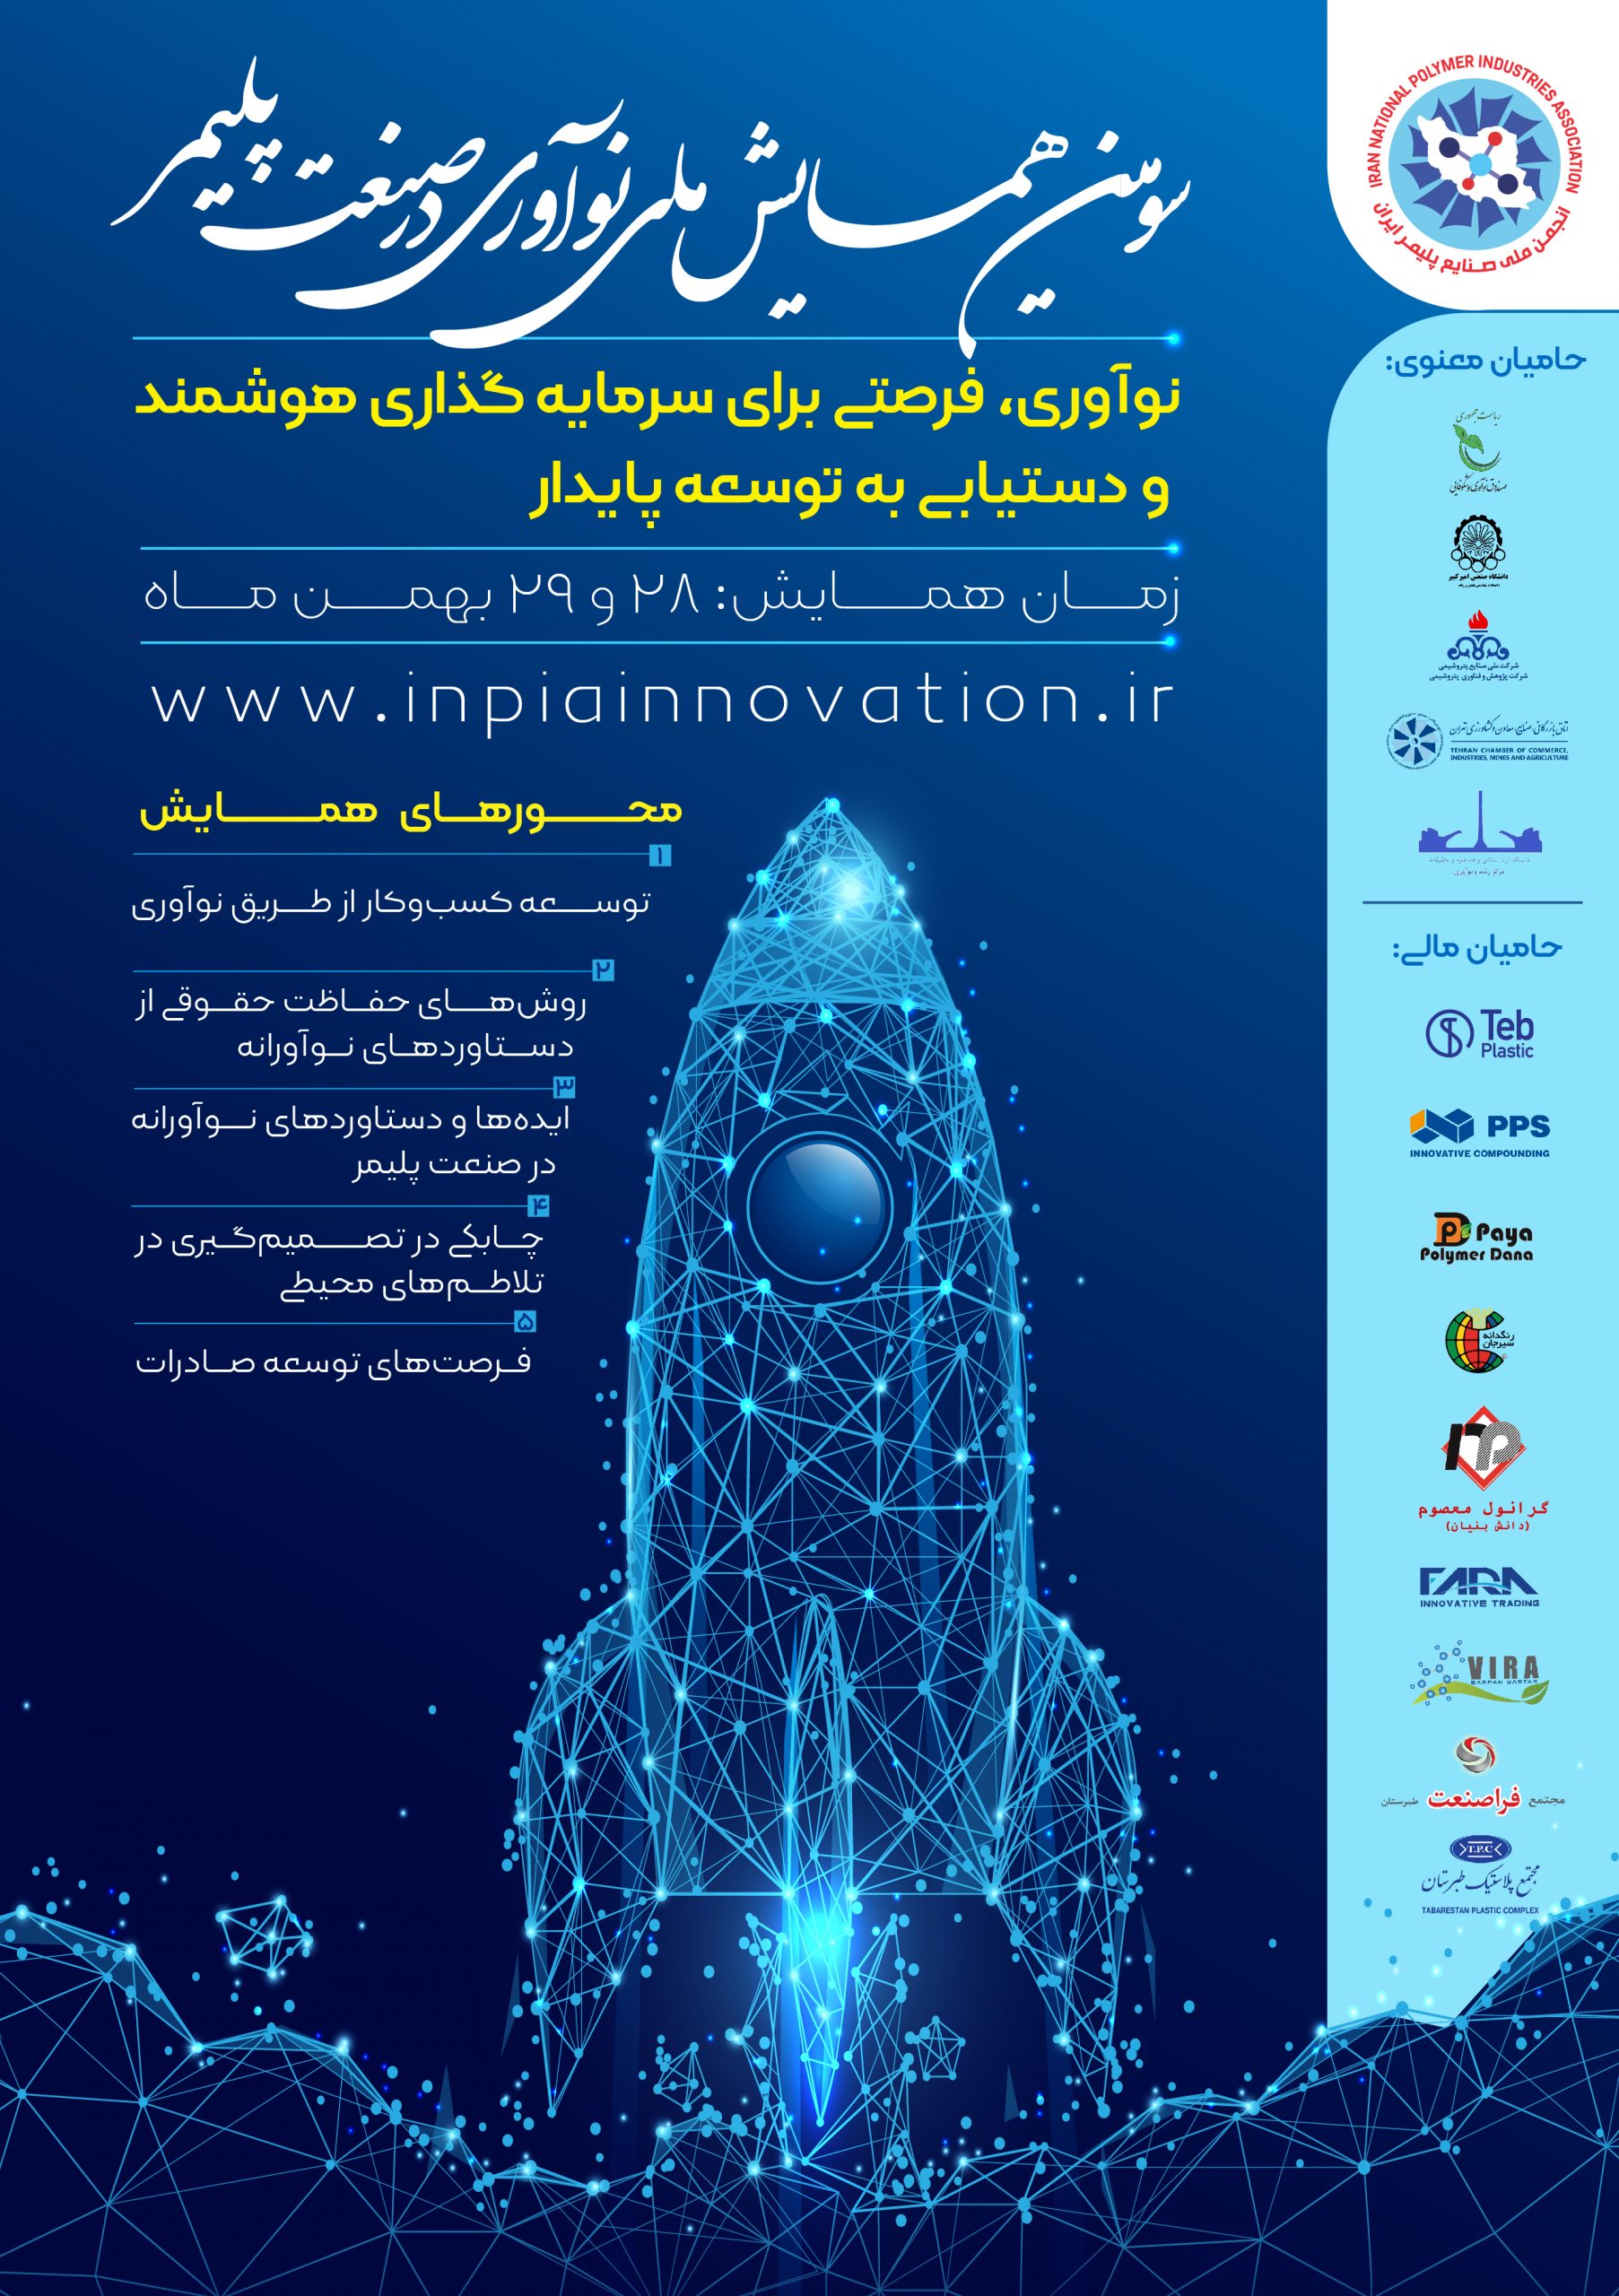 An overview of the background of the sponsors of the third conference on innovation in the plastics industry